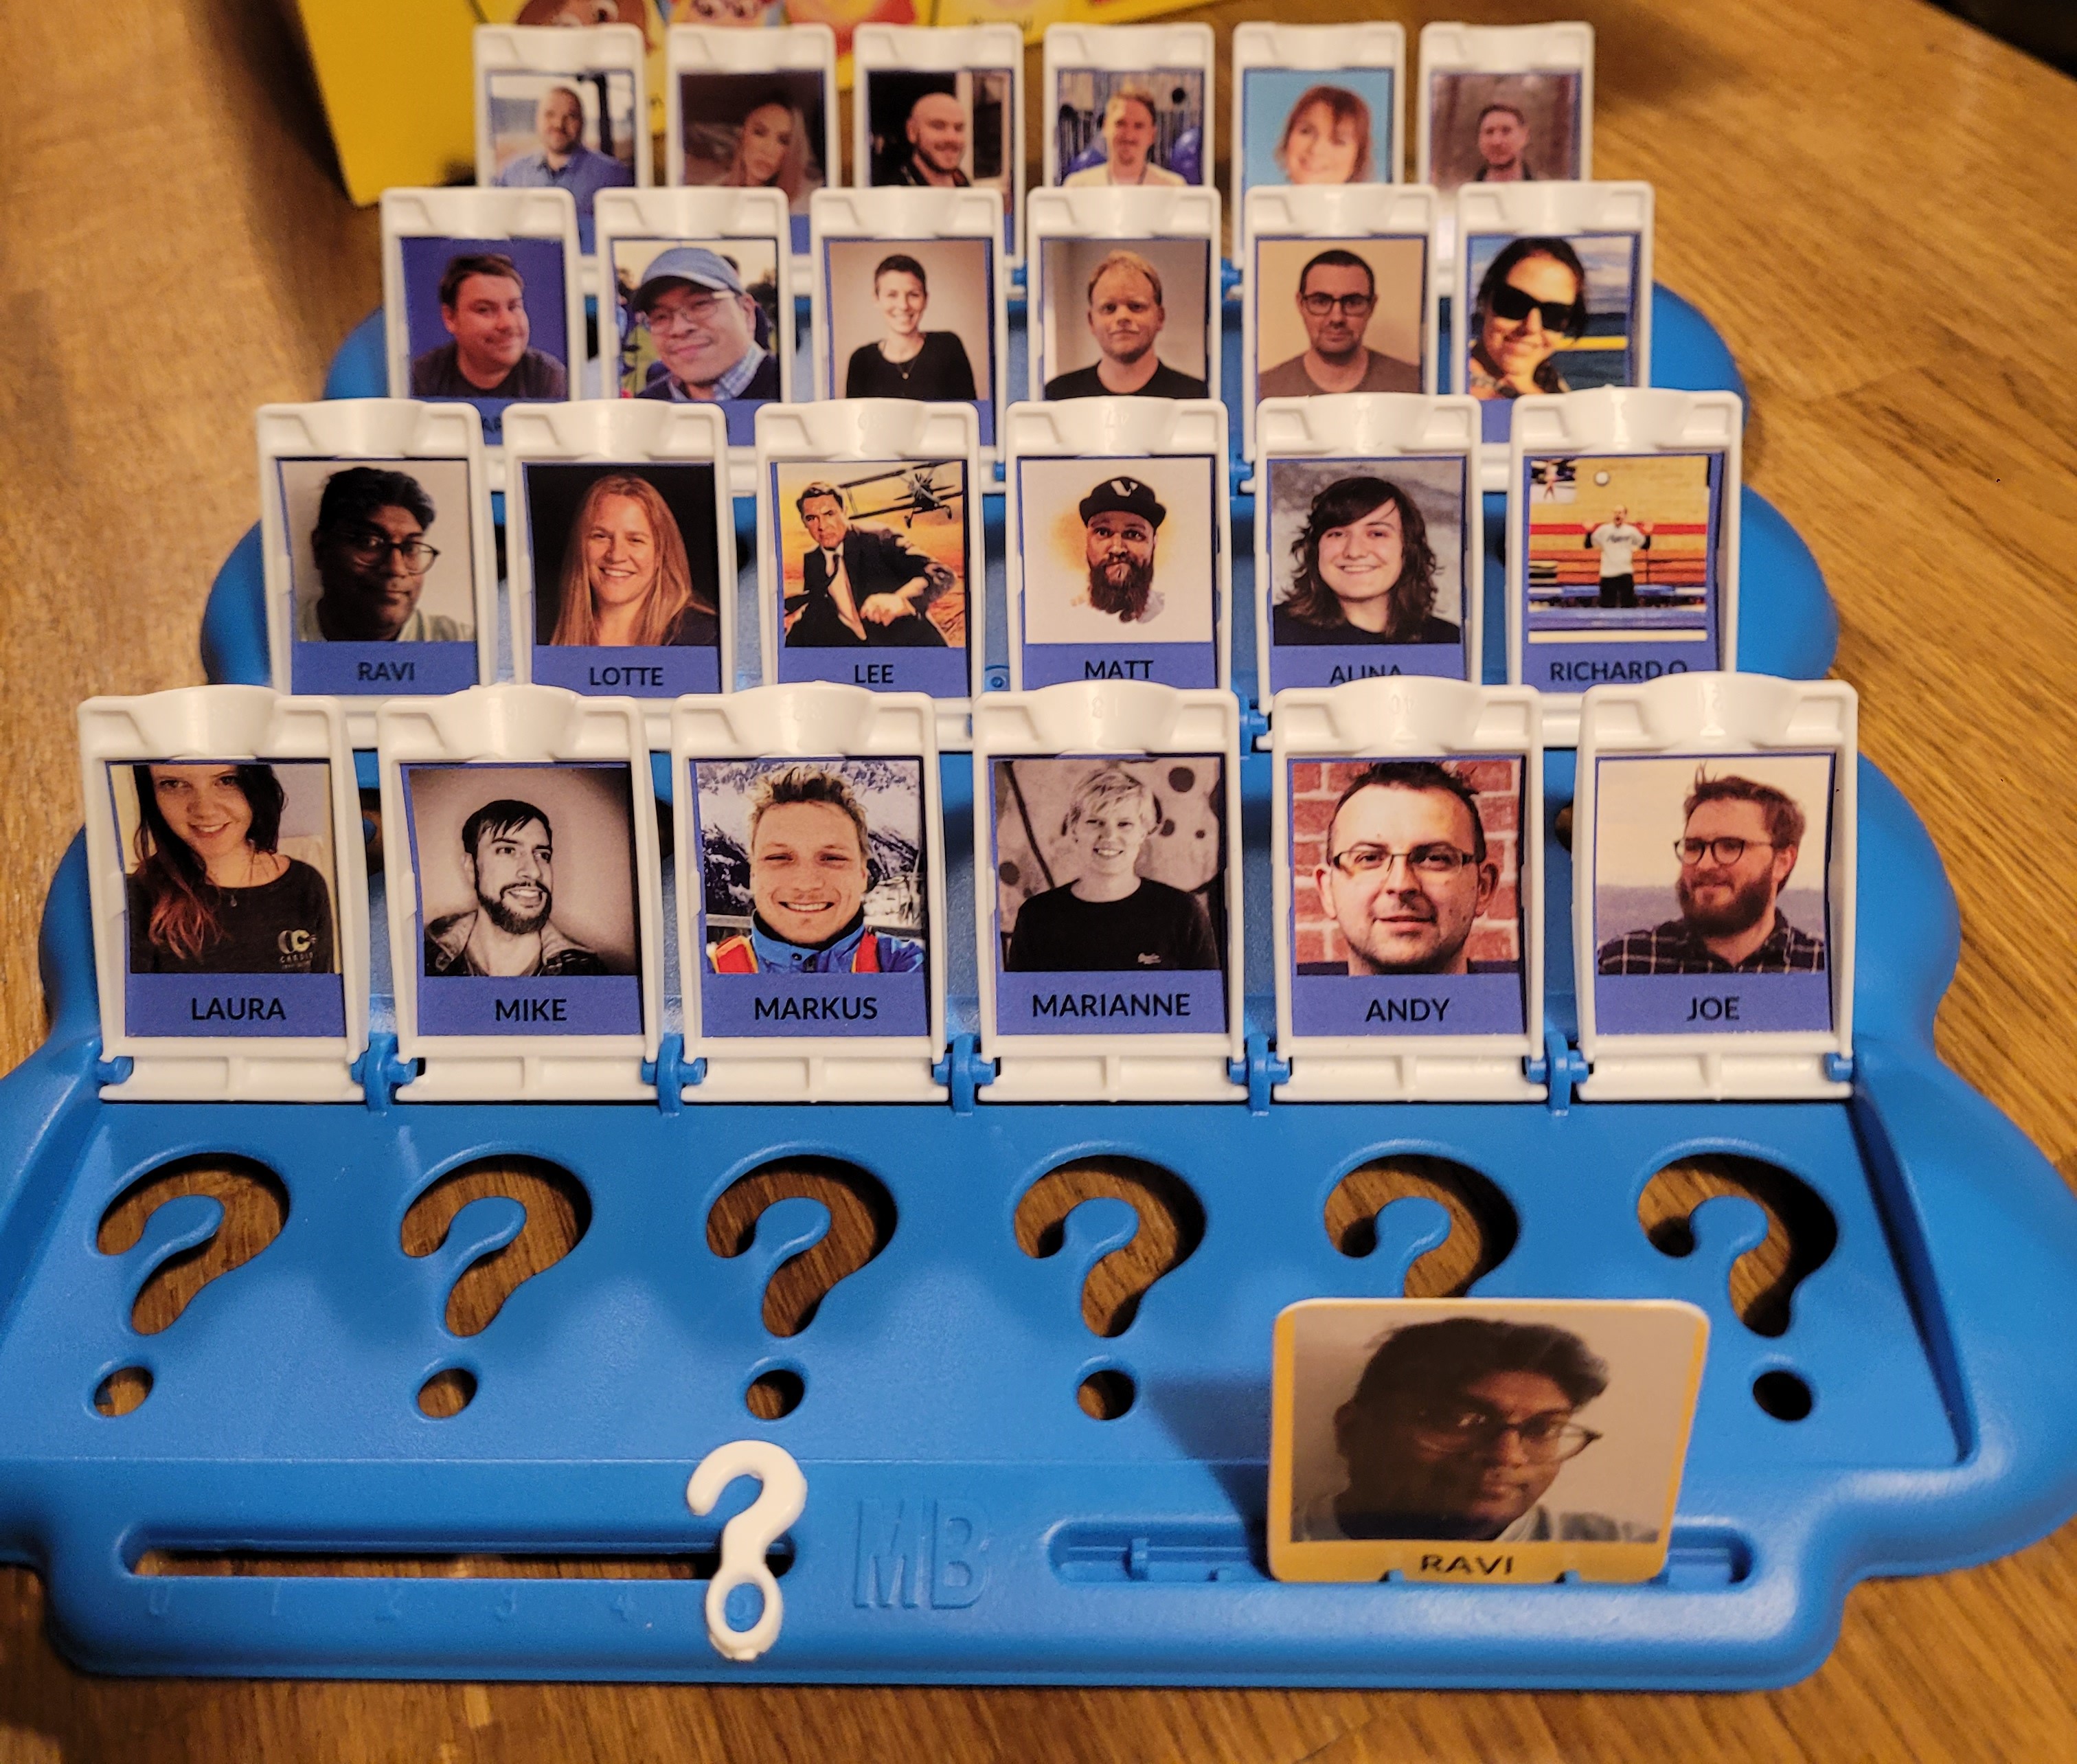 One Guess Who Board with the CodeCabin attendees on the image cards